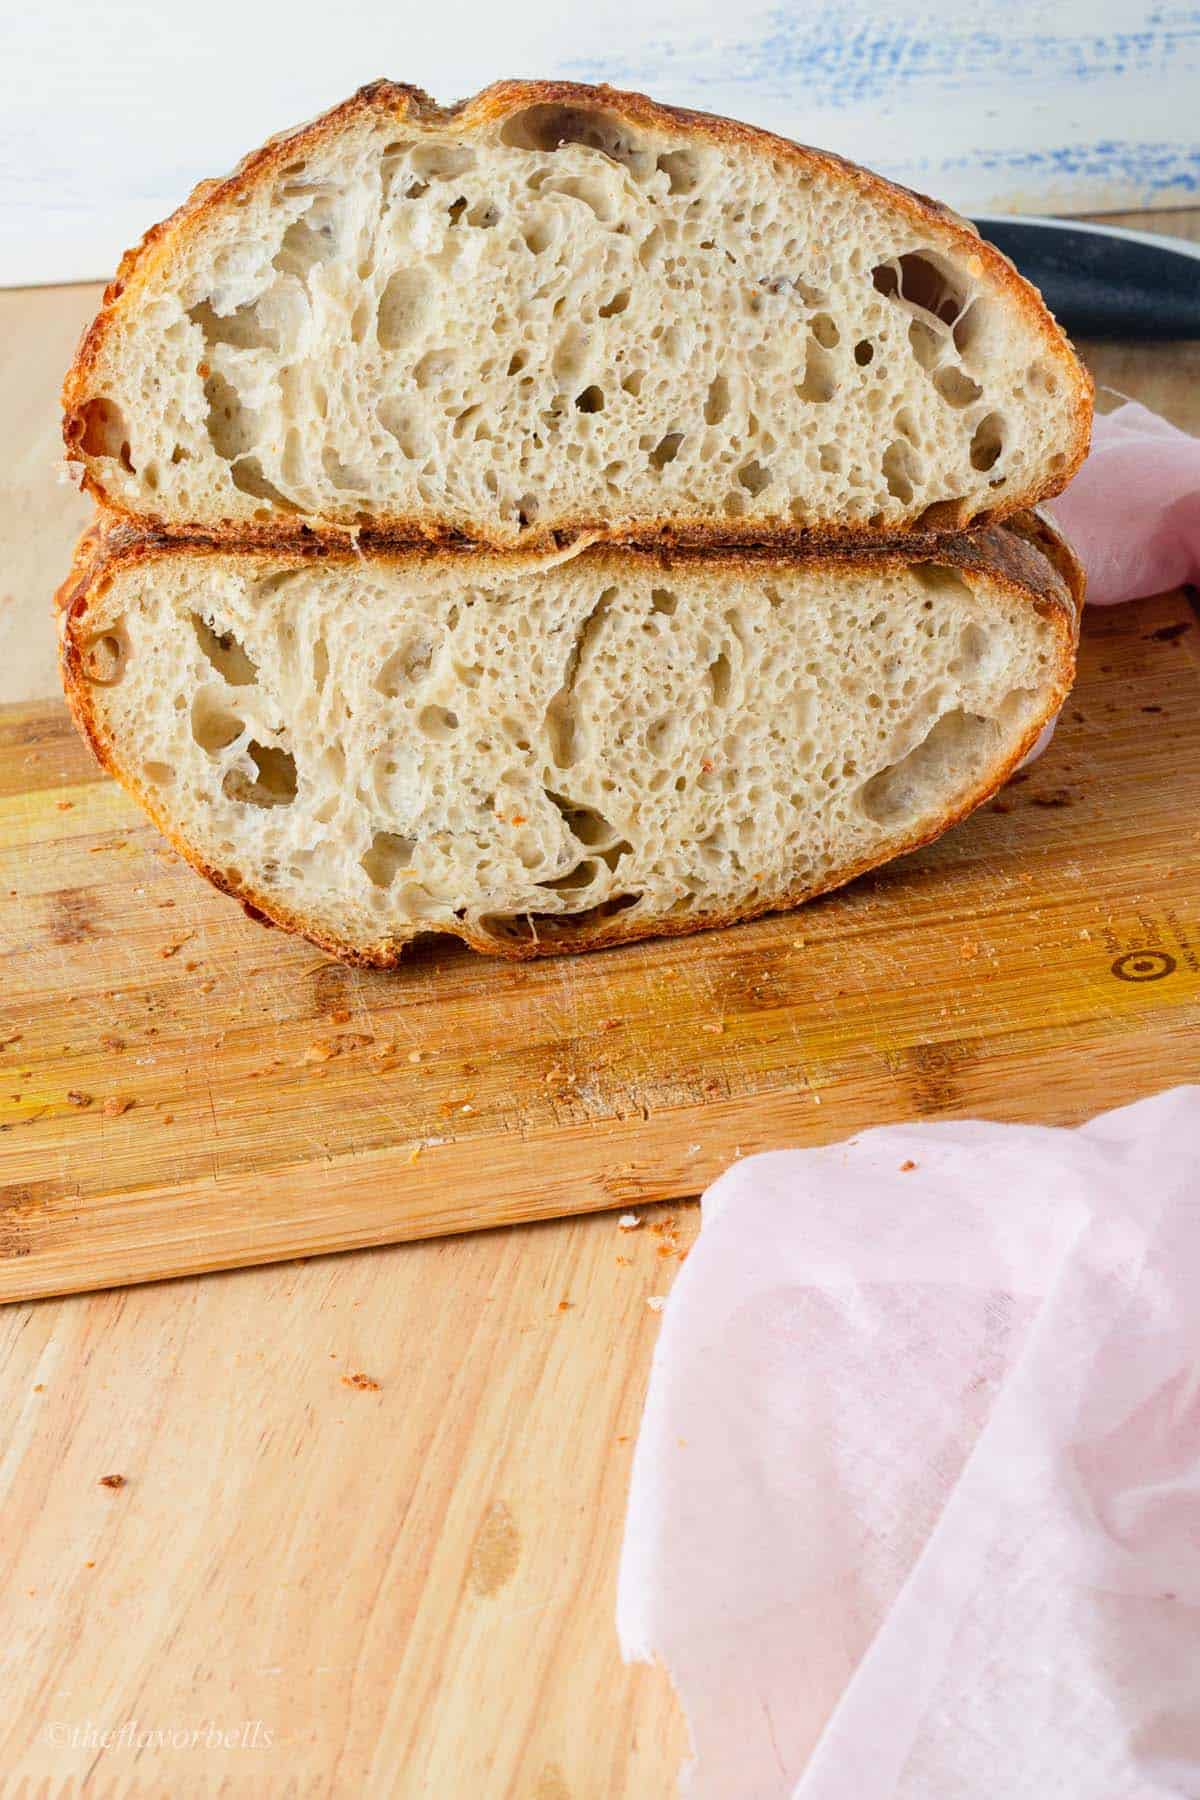 sourdough discard bread sliced from the center to show the crumbs